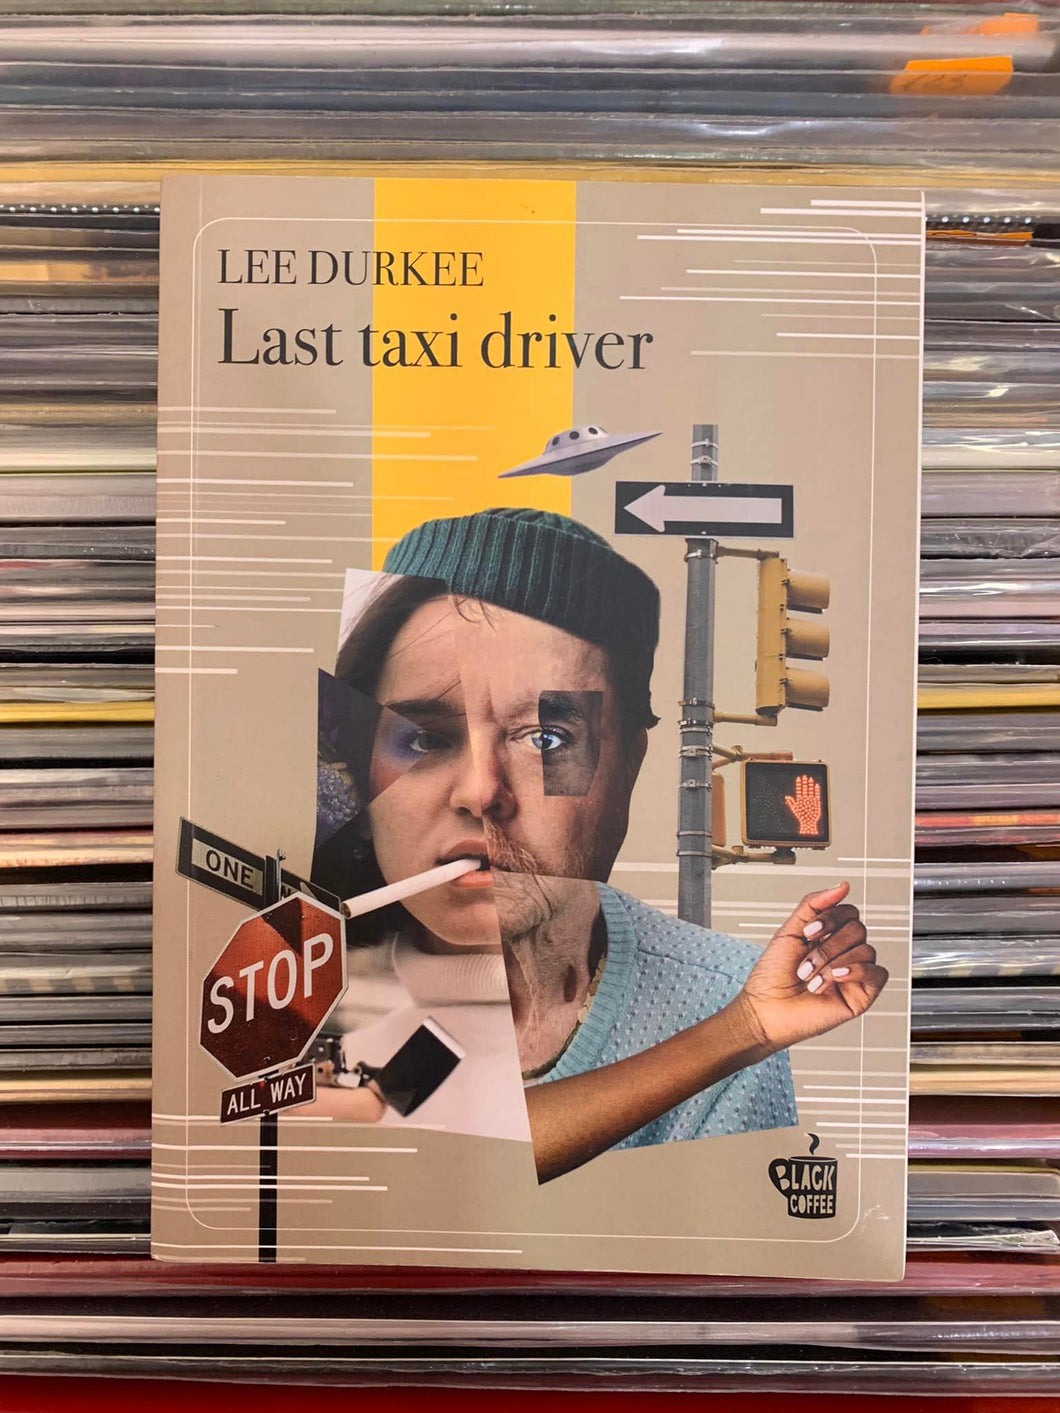 Durkee Lee - Last Taxi Driver